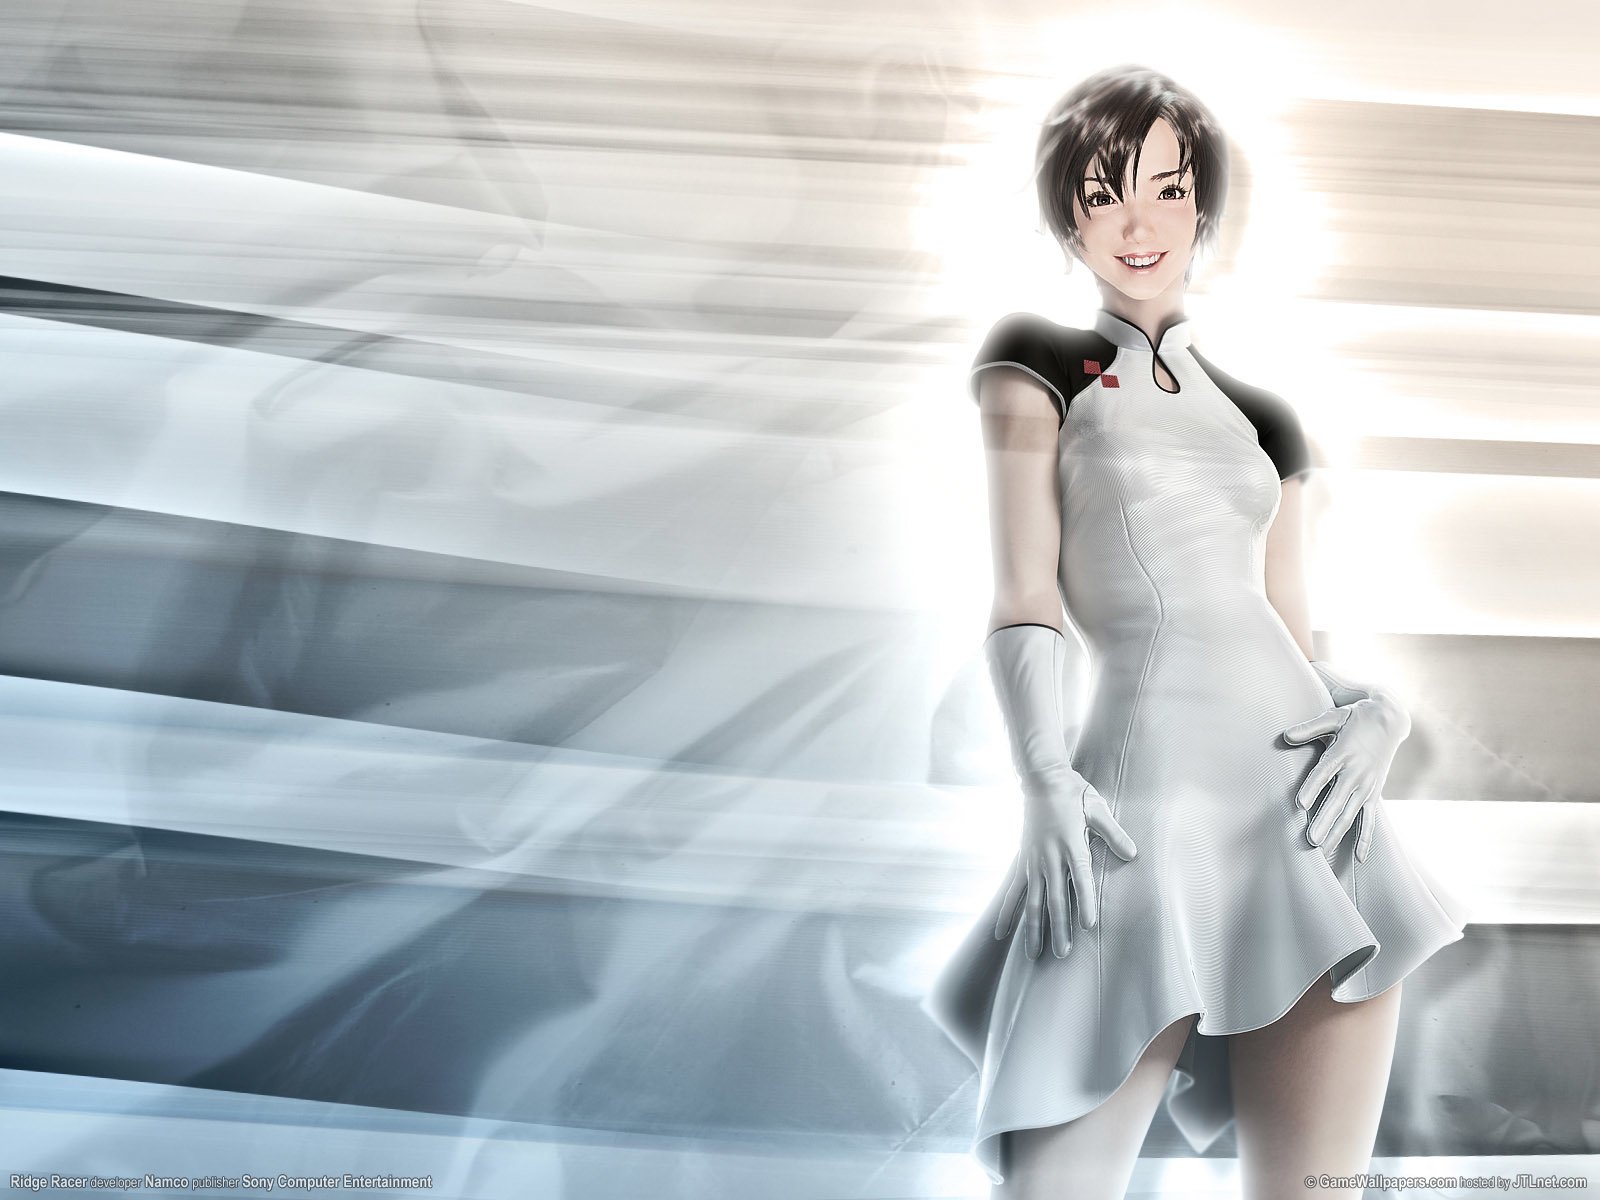 20 Ridge Racer HD Wallpapers and Backgrounds 1600x1200